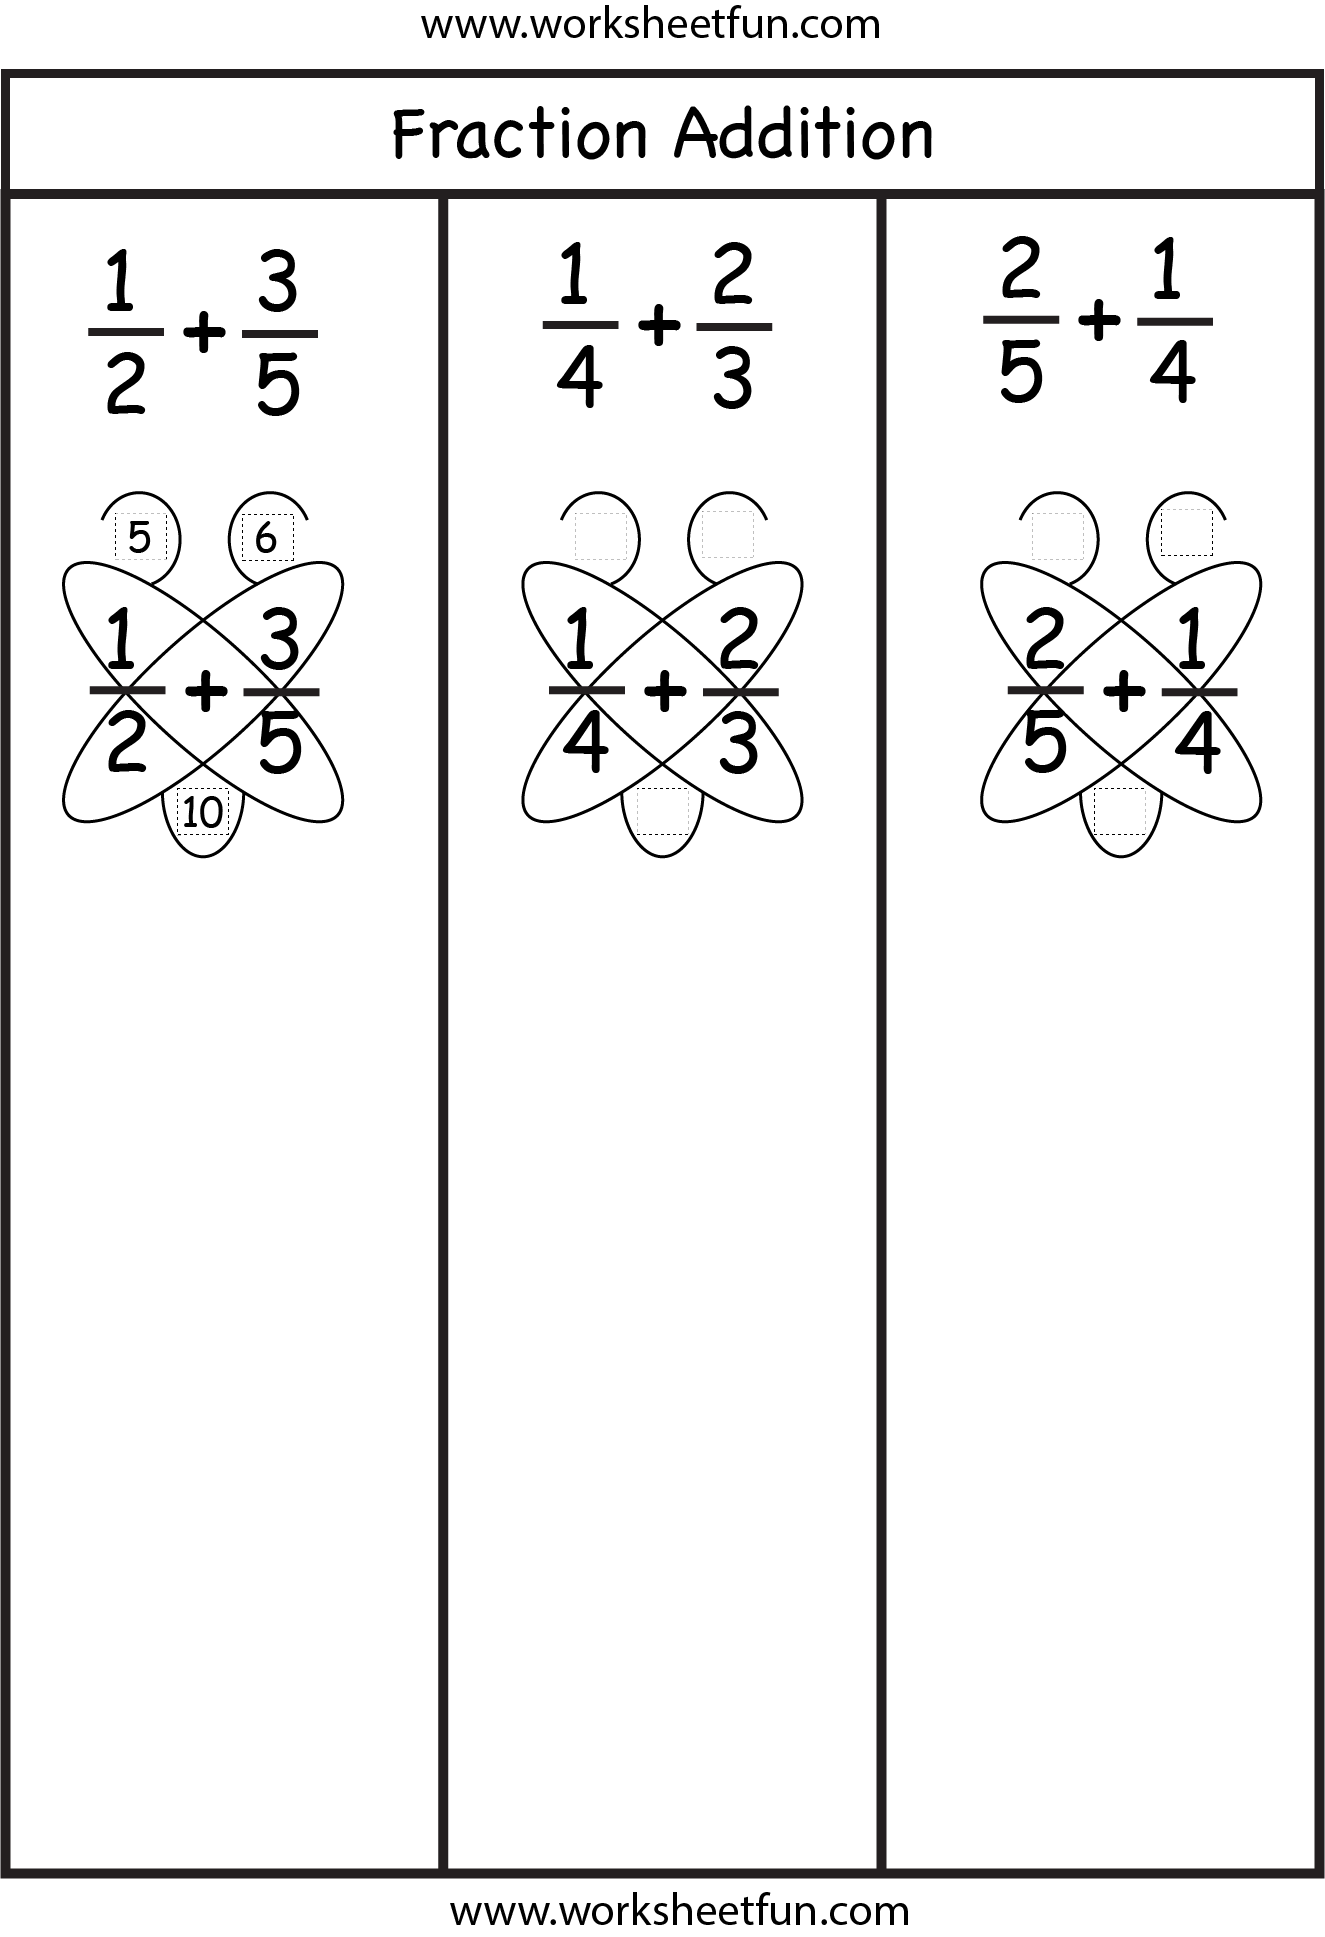 Fraction Addition – Butterfly Method / FREE Printable Worksheets